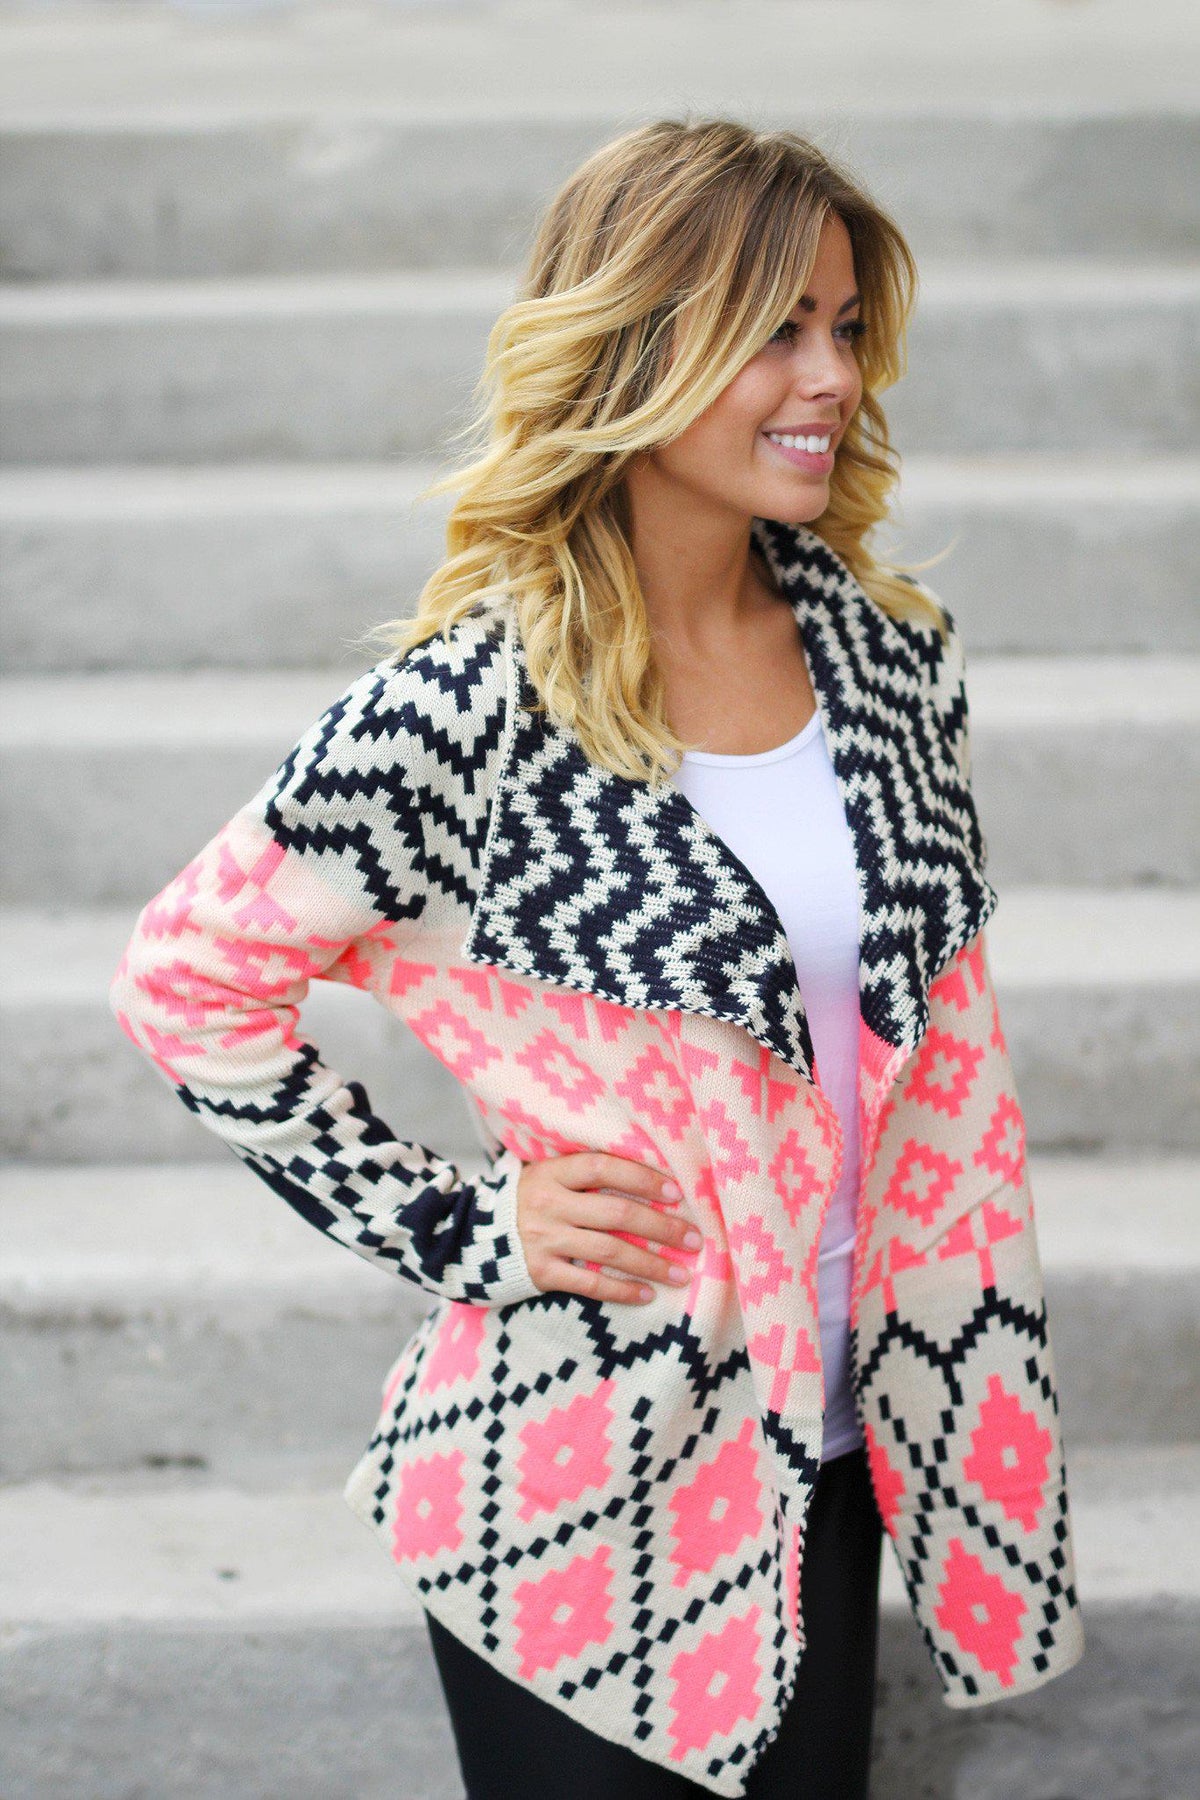 Neon Pink and Navy Printed Cardigan | Neon Pink Cardi – Saved by the Dress